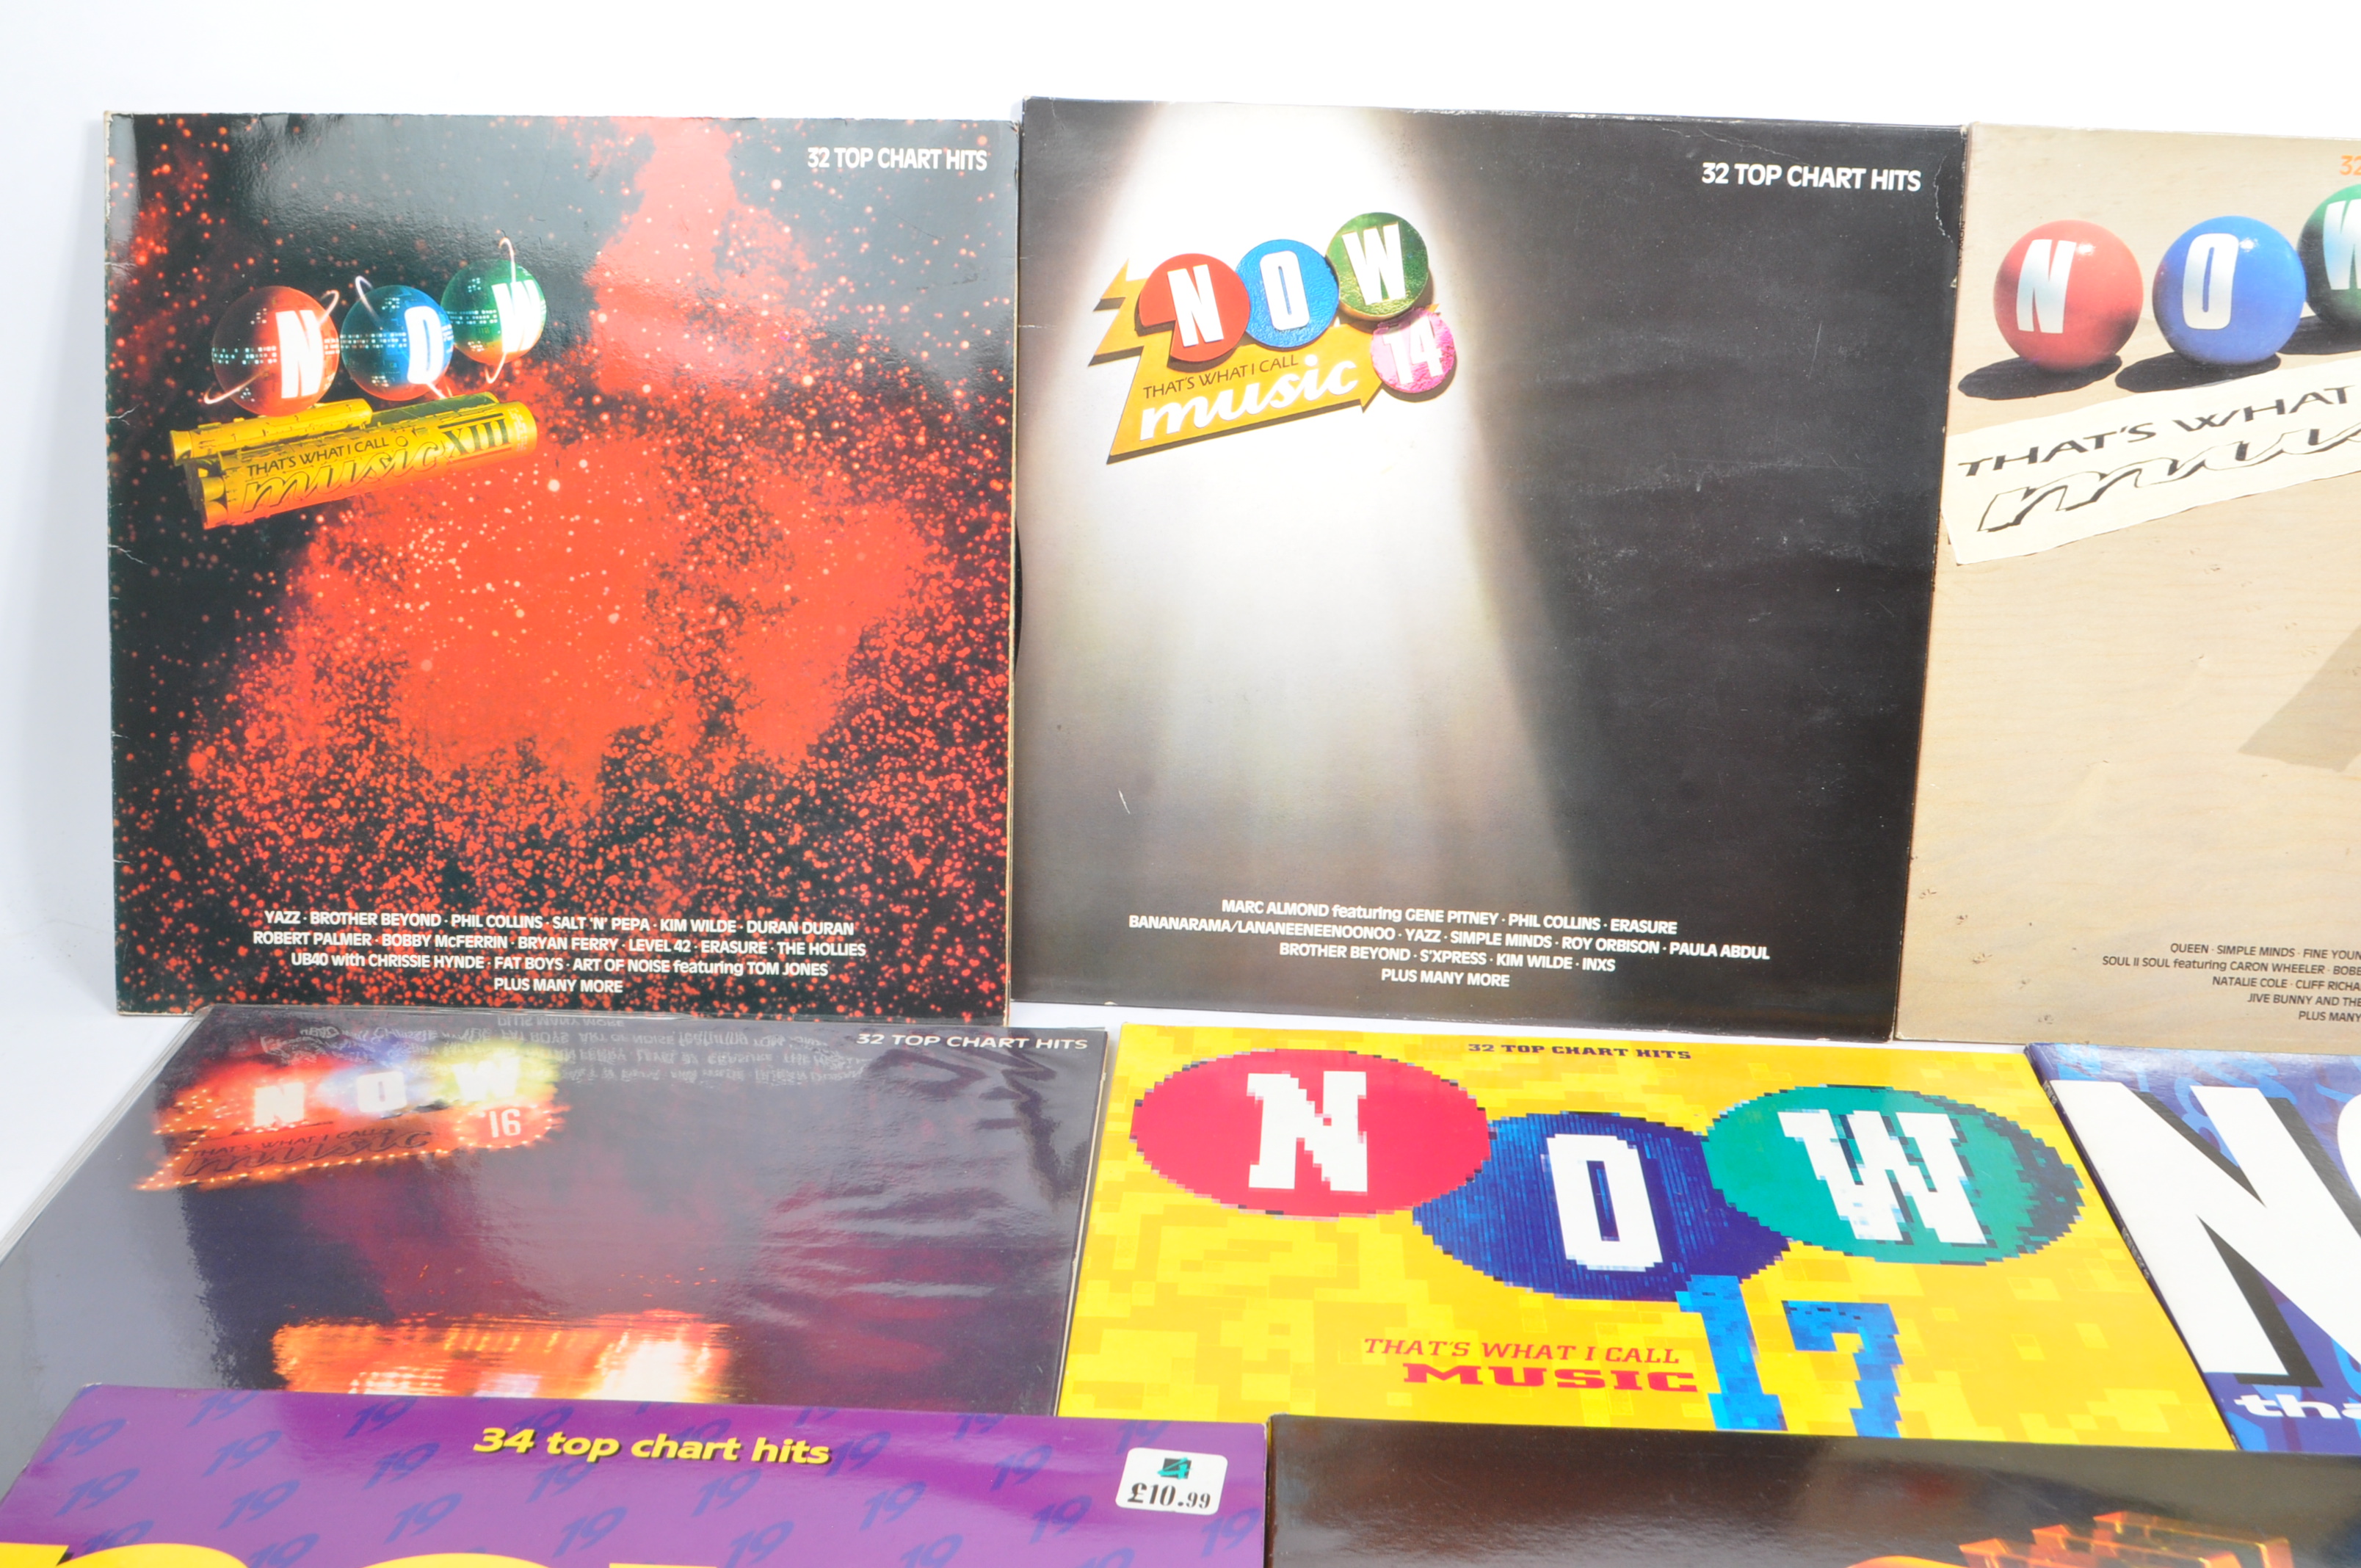 COLLECTION OF NOW THATS WHAT I CALL MUSIC VINYL ALBUM RECORDS - Image 8 of 10